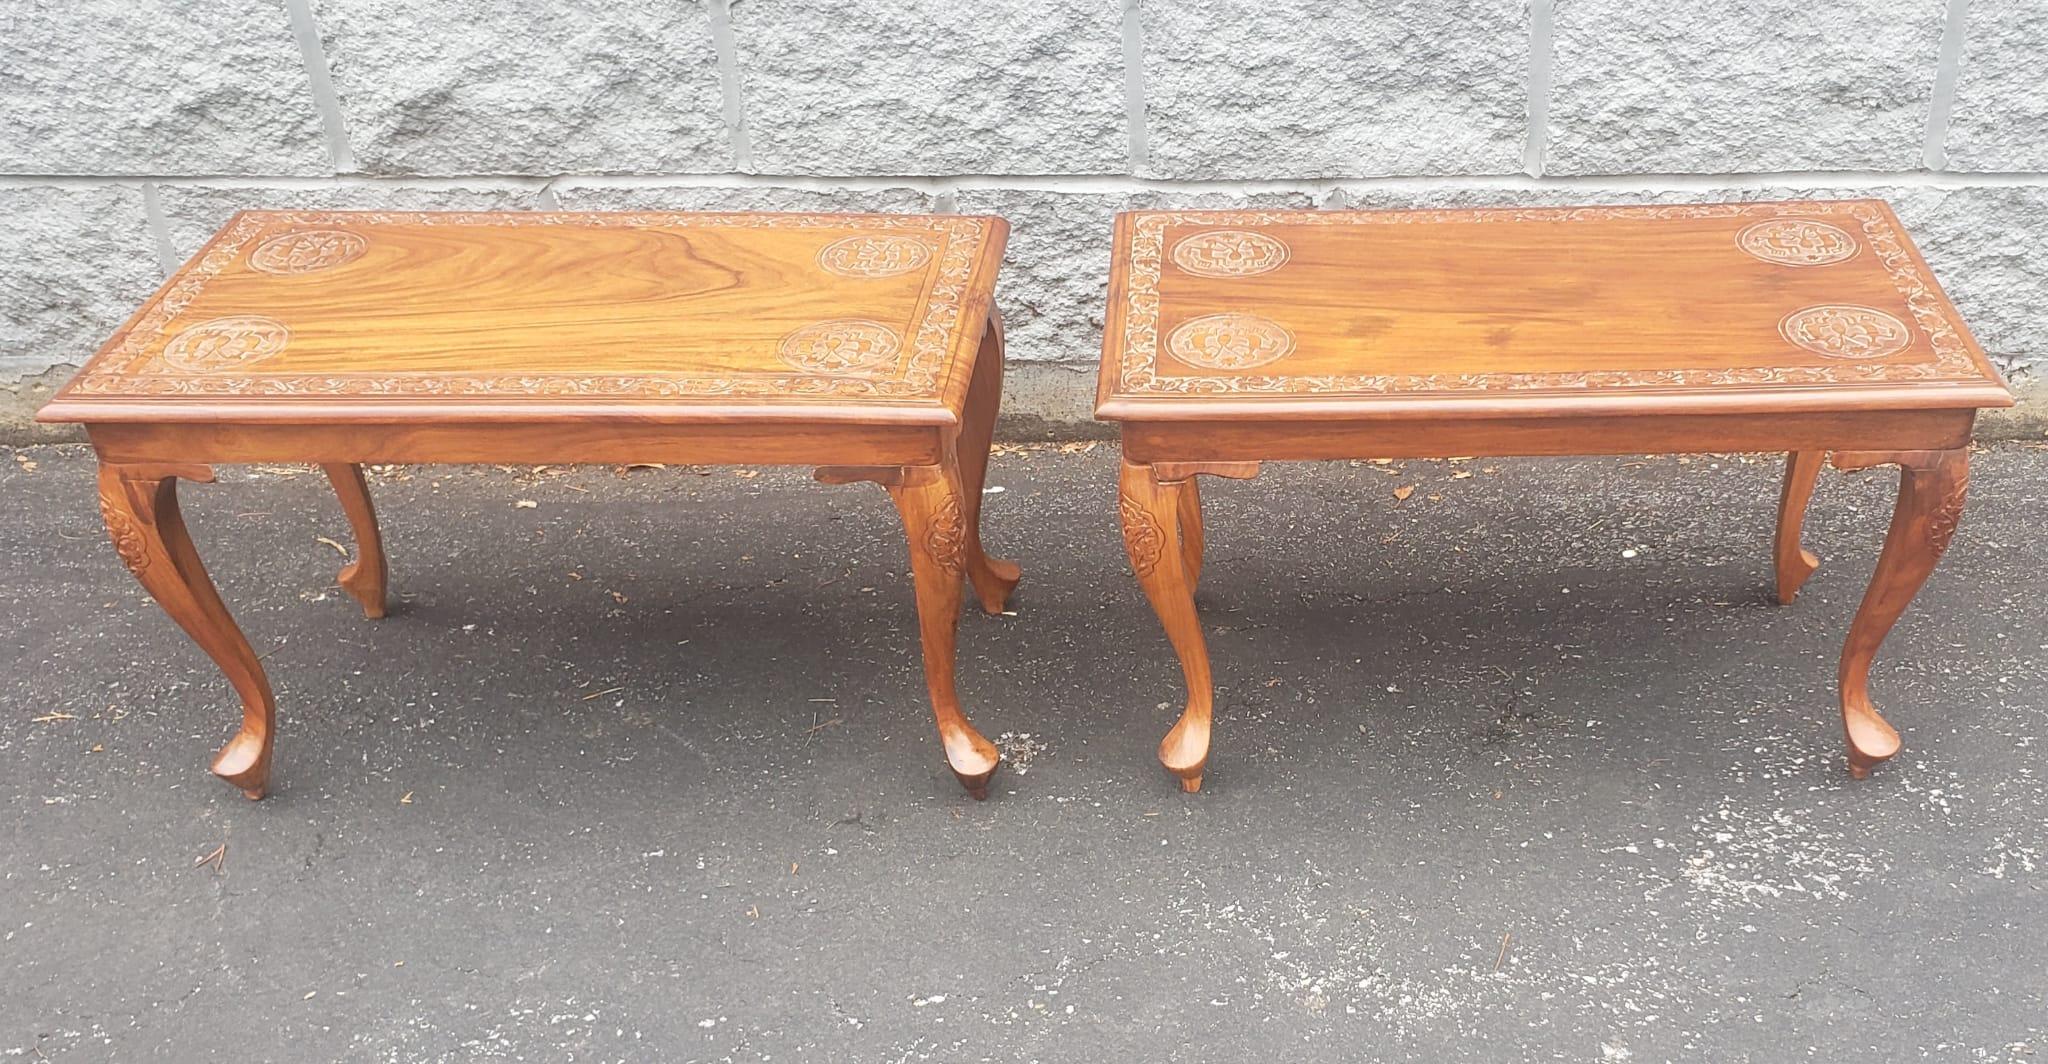 Midcentury Anglo-Japanese Carved Hardwood Low Side Tables, a Pair For Sale 2